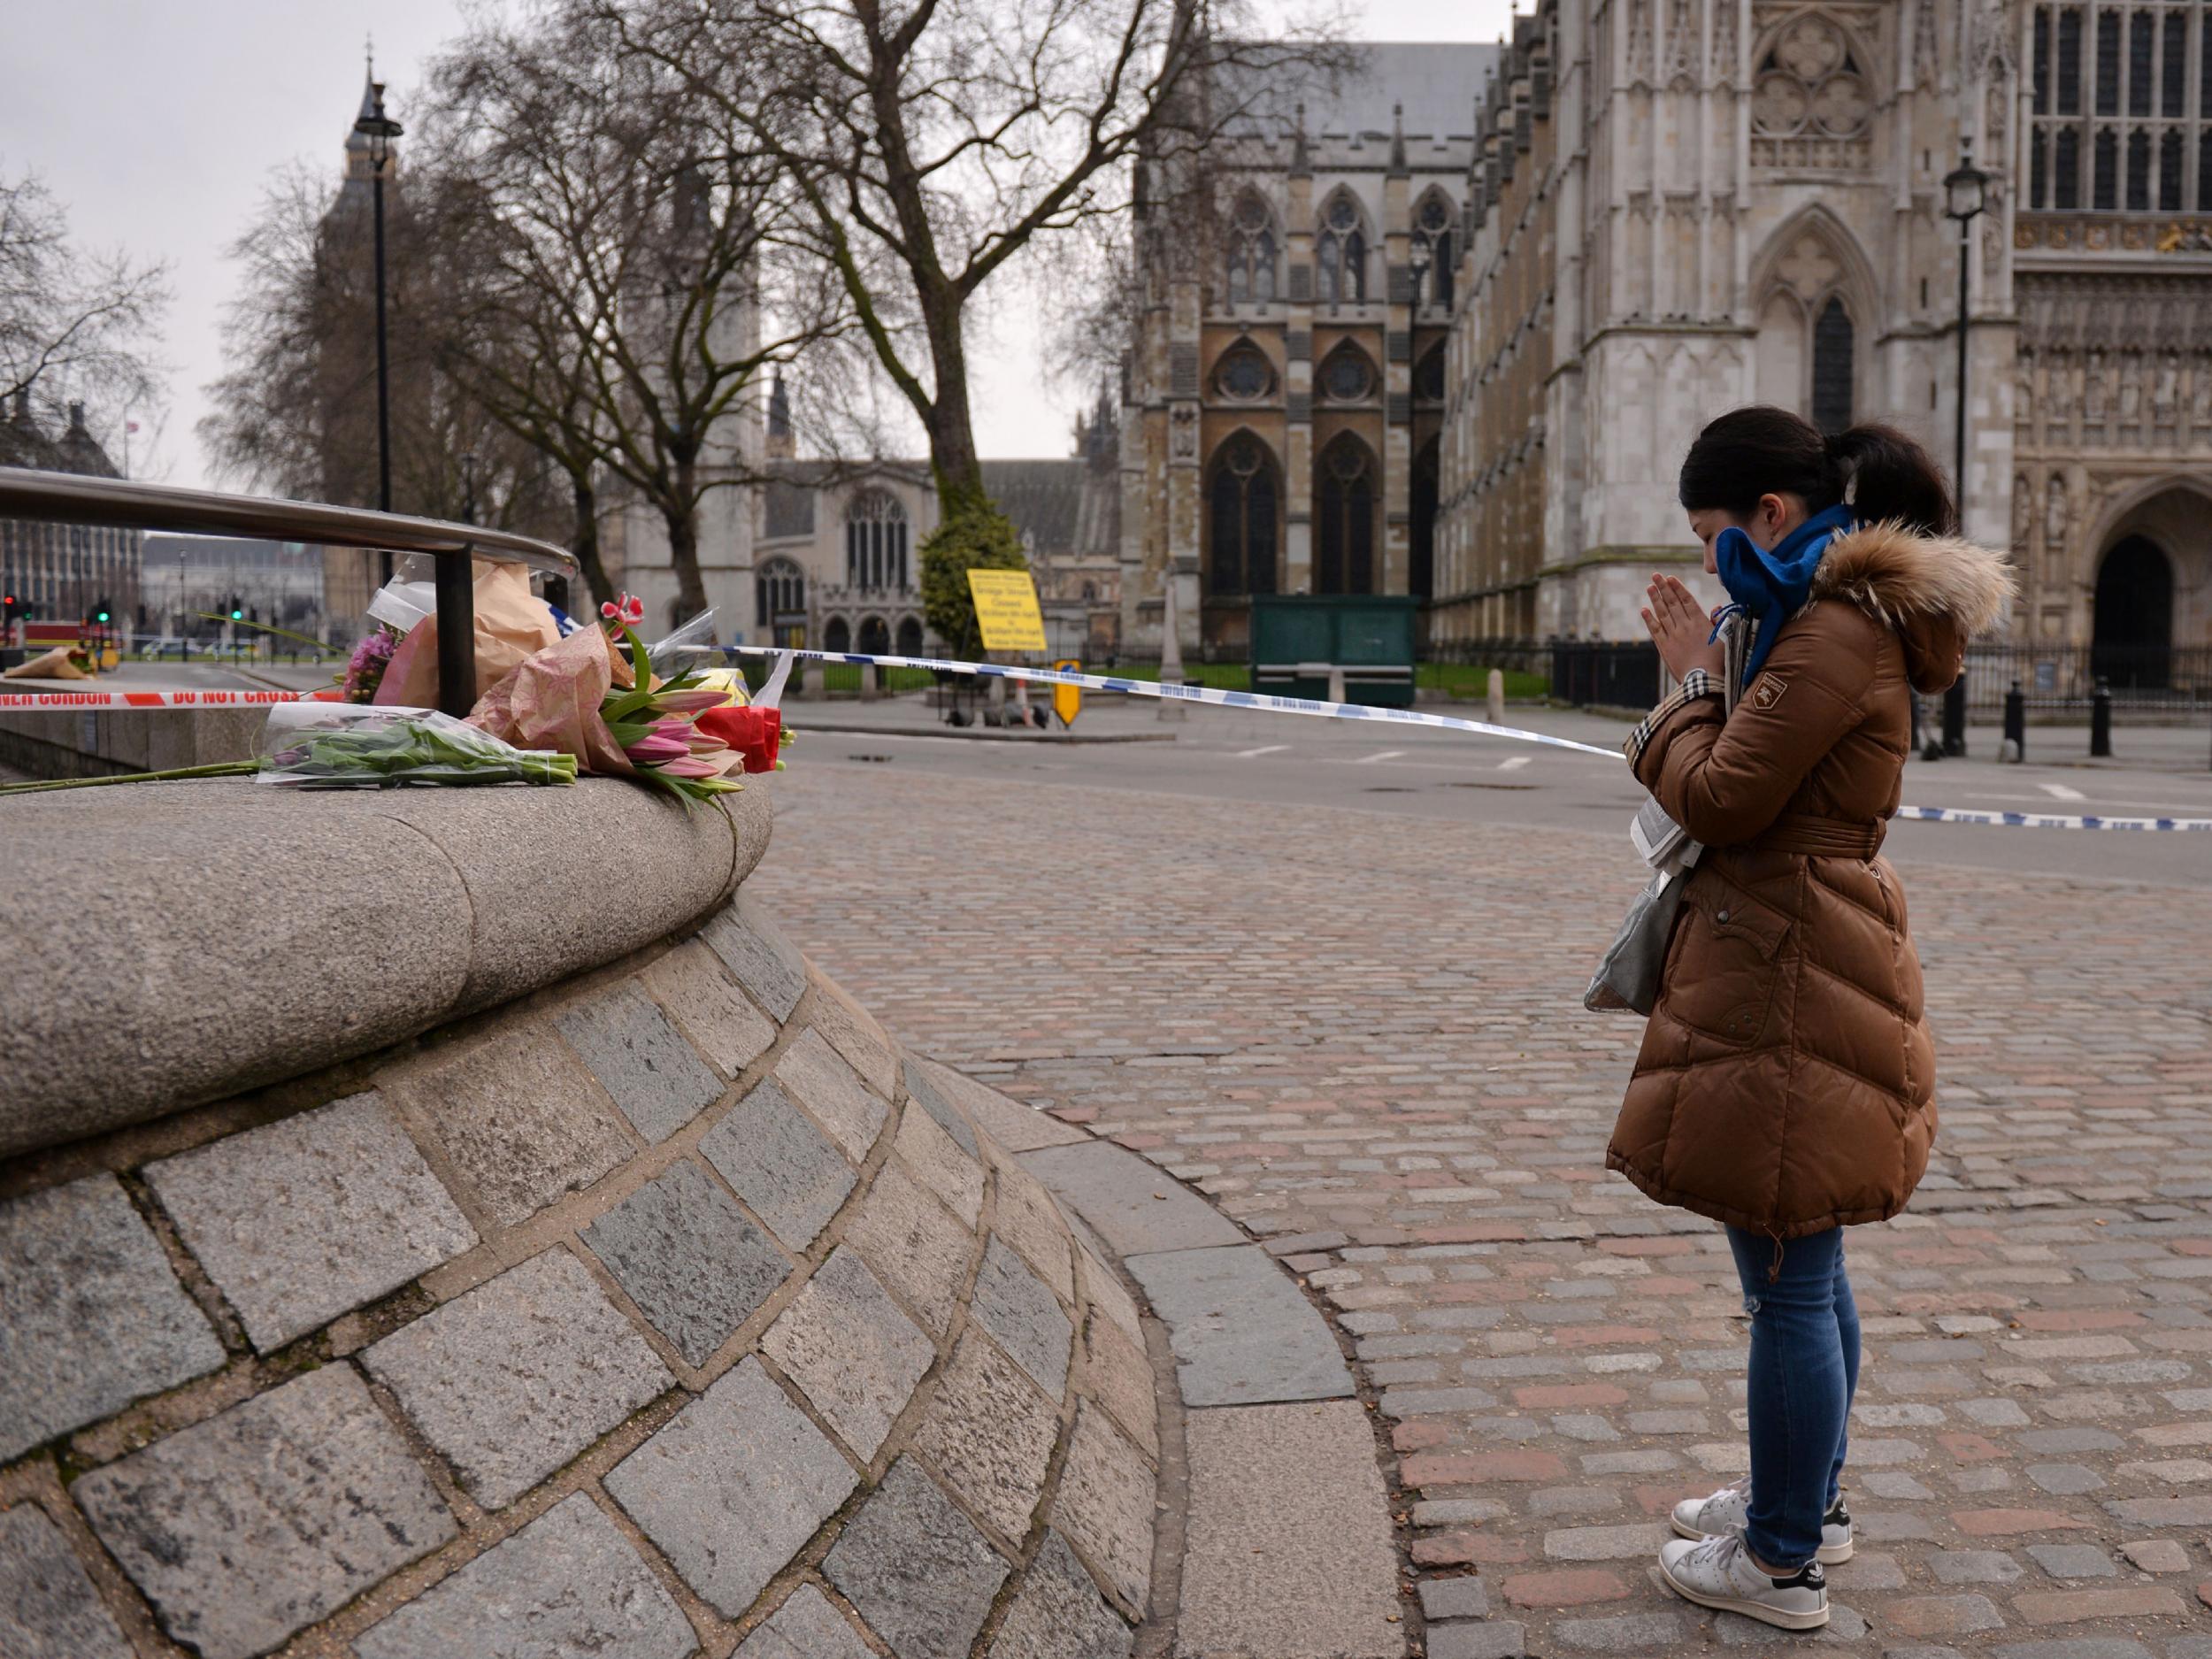 A minute's silence was held the morning after the Westminster attack that left four dead